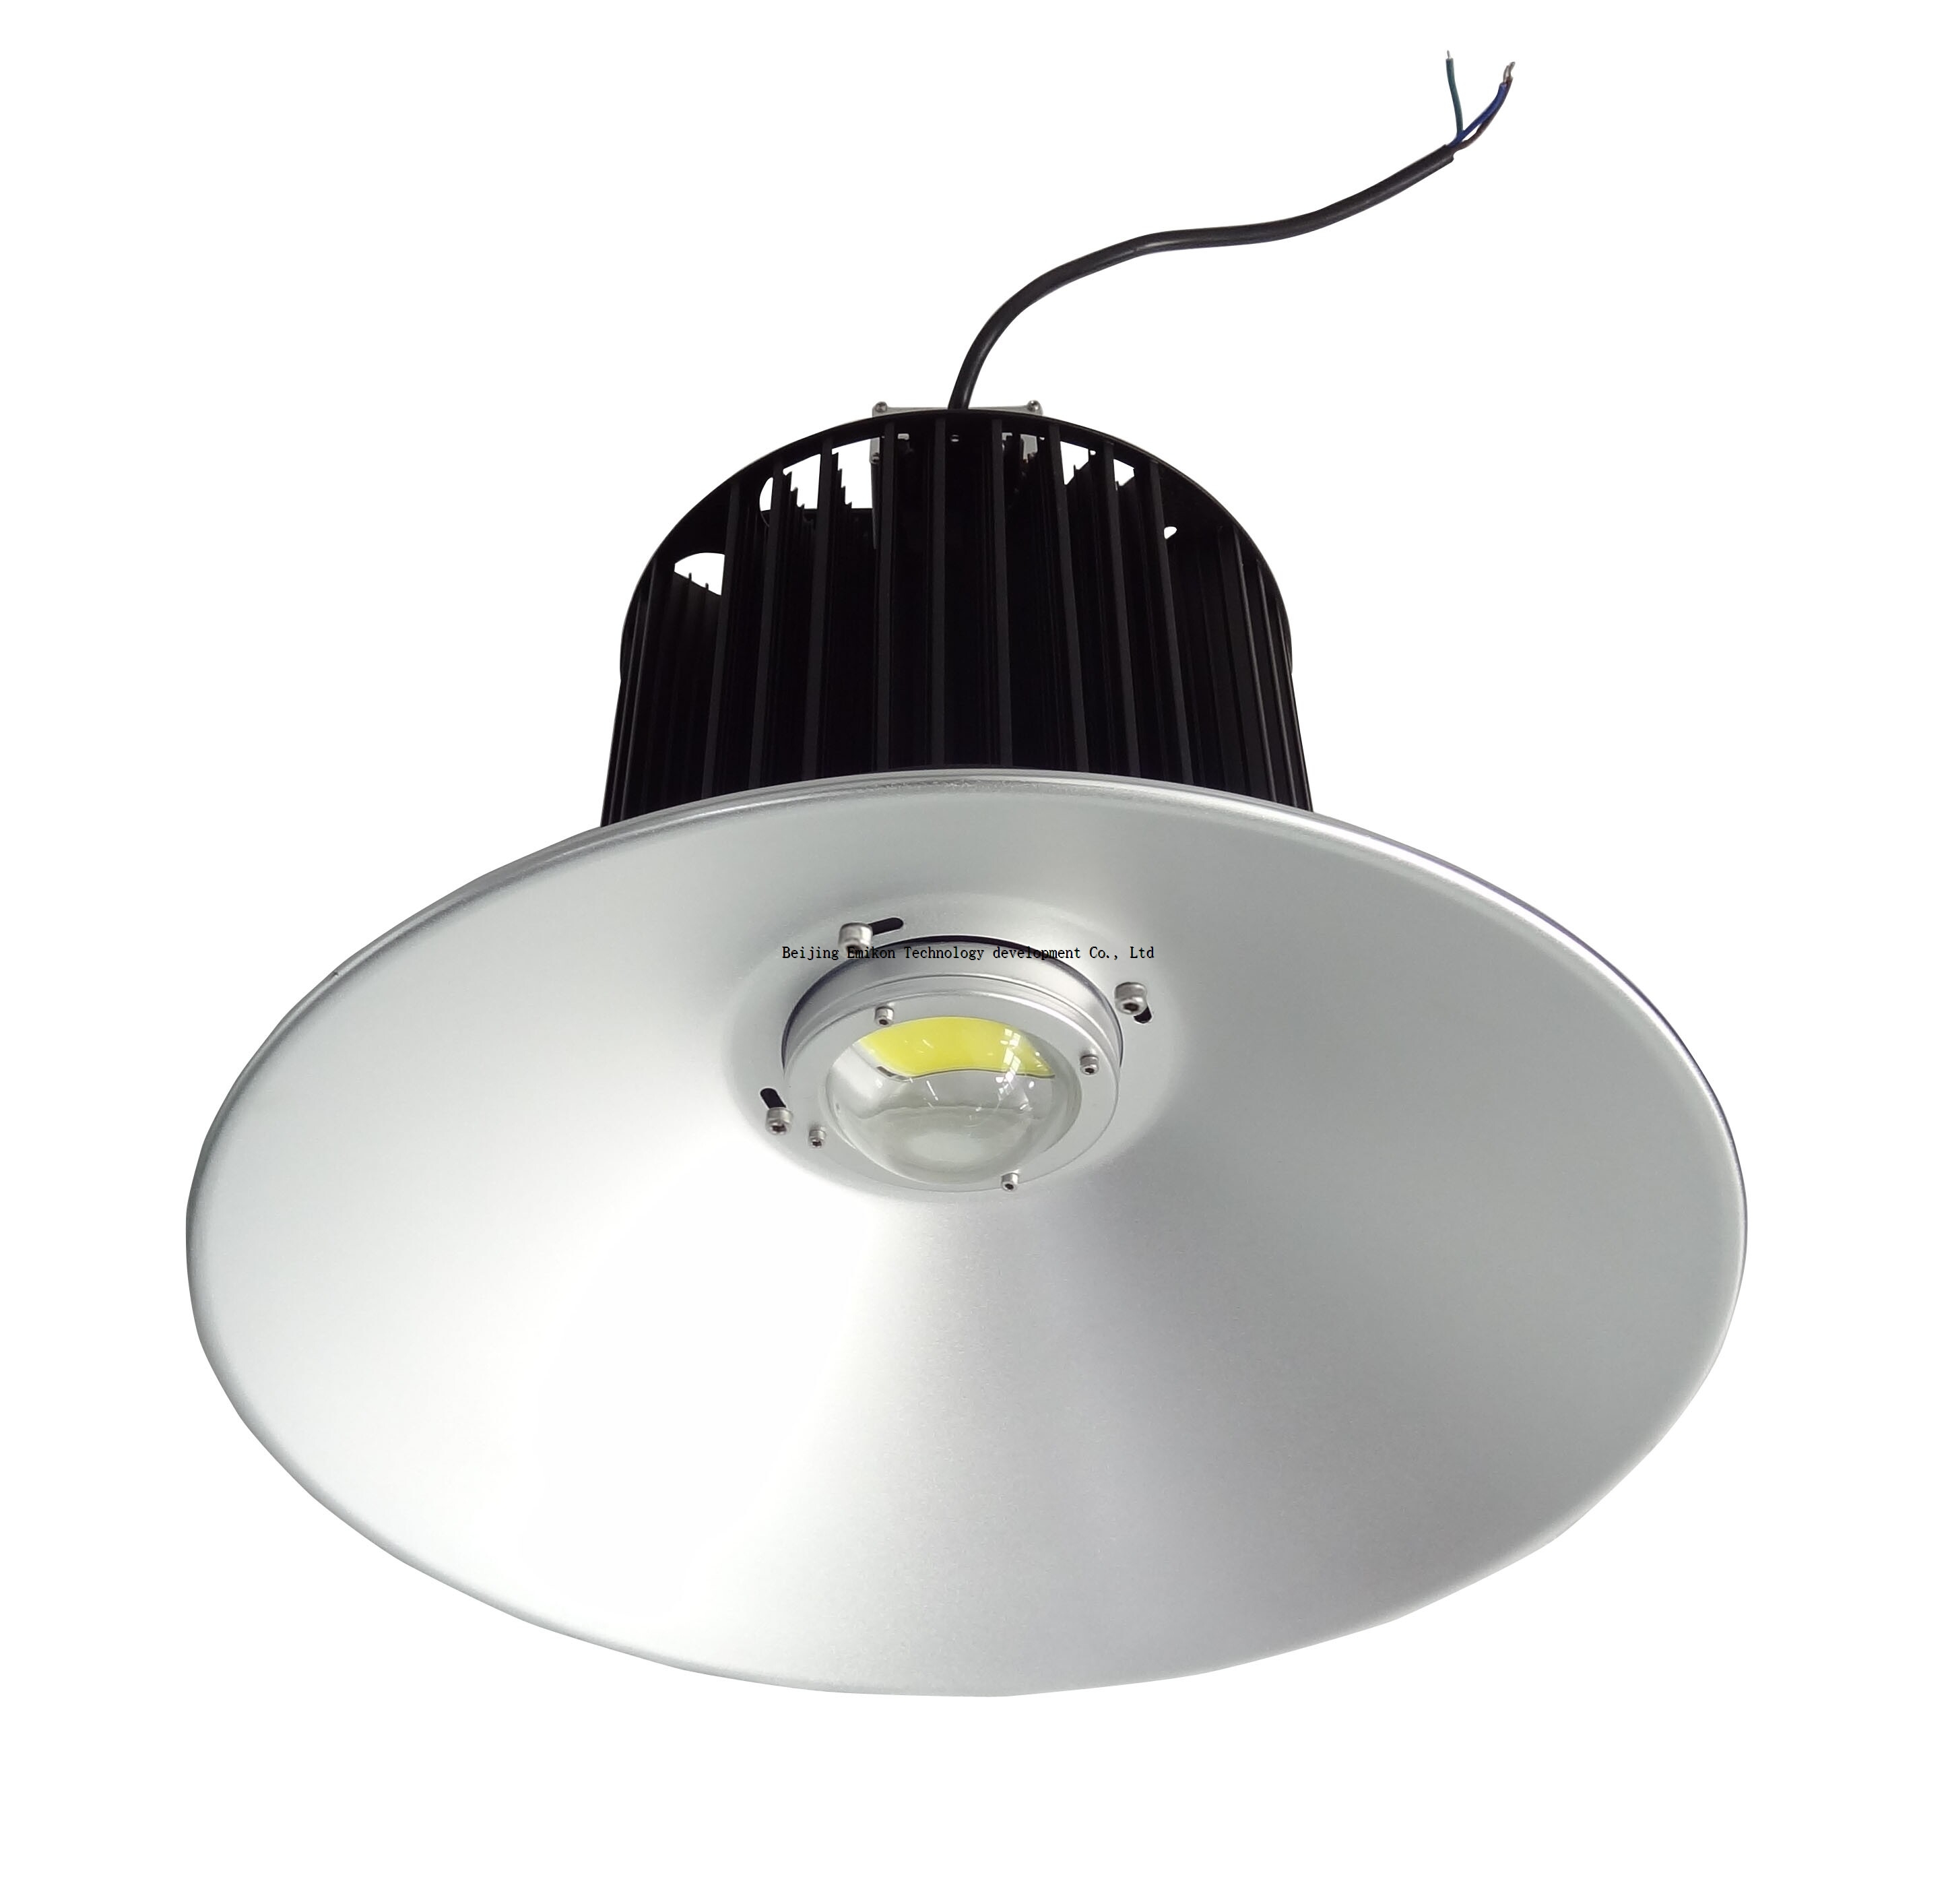 High quality LED high bay light with 5 year warranty